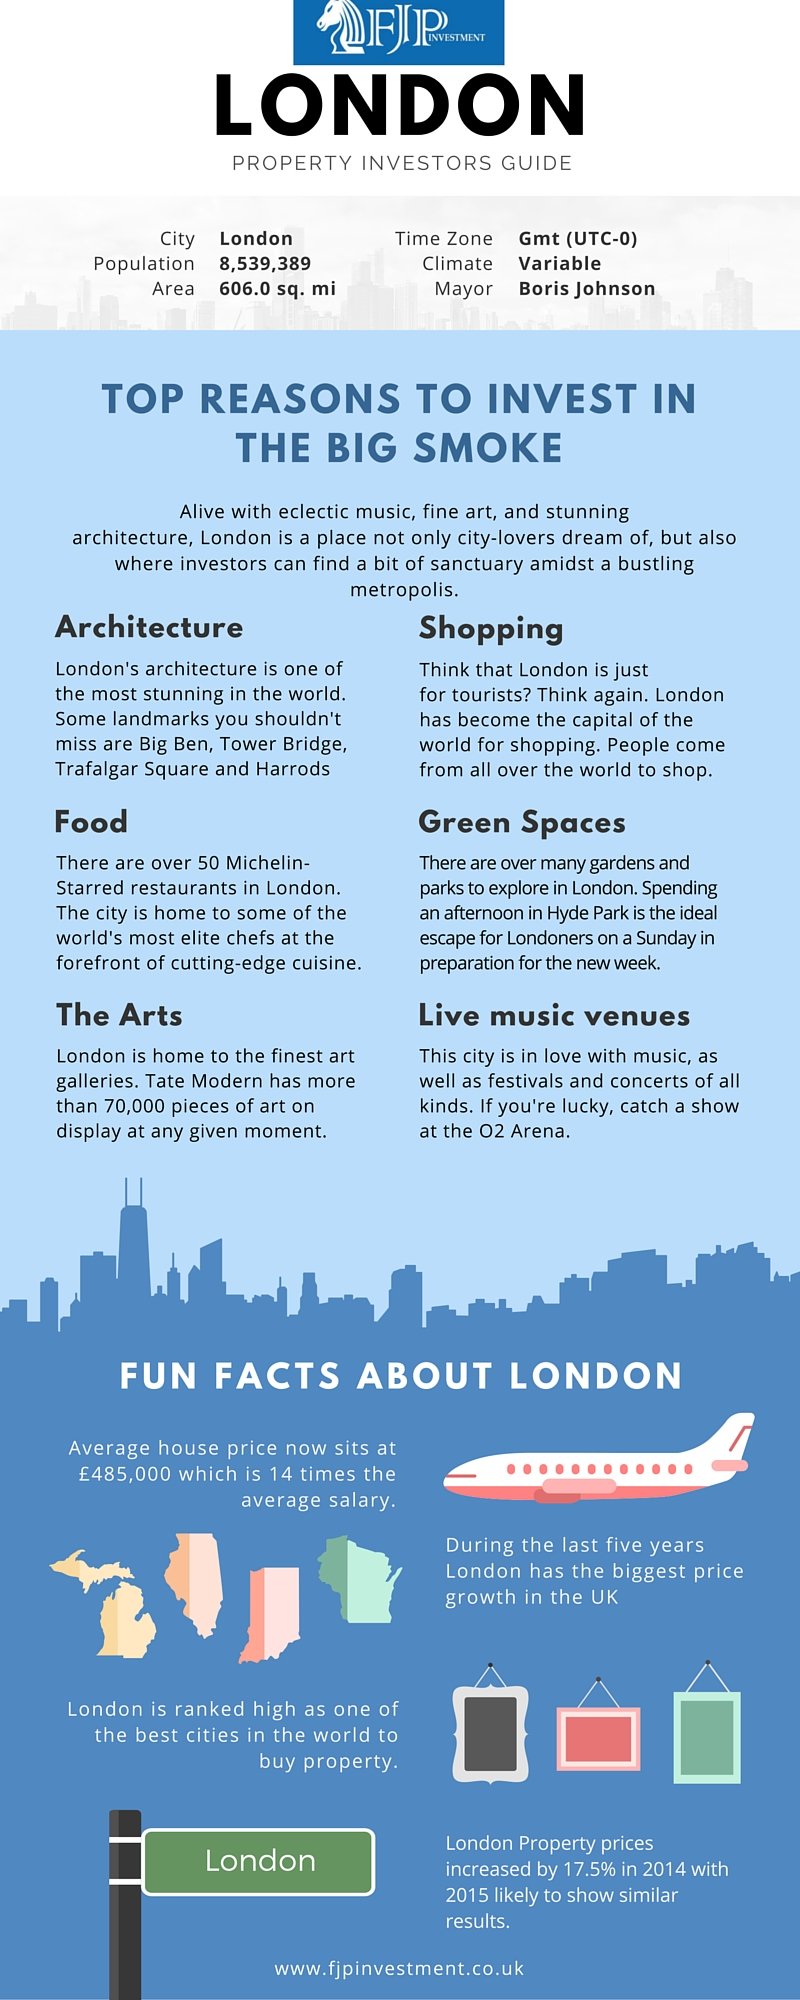 London Property Investors Guide Infographic